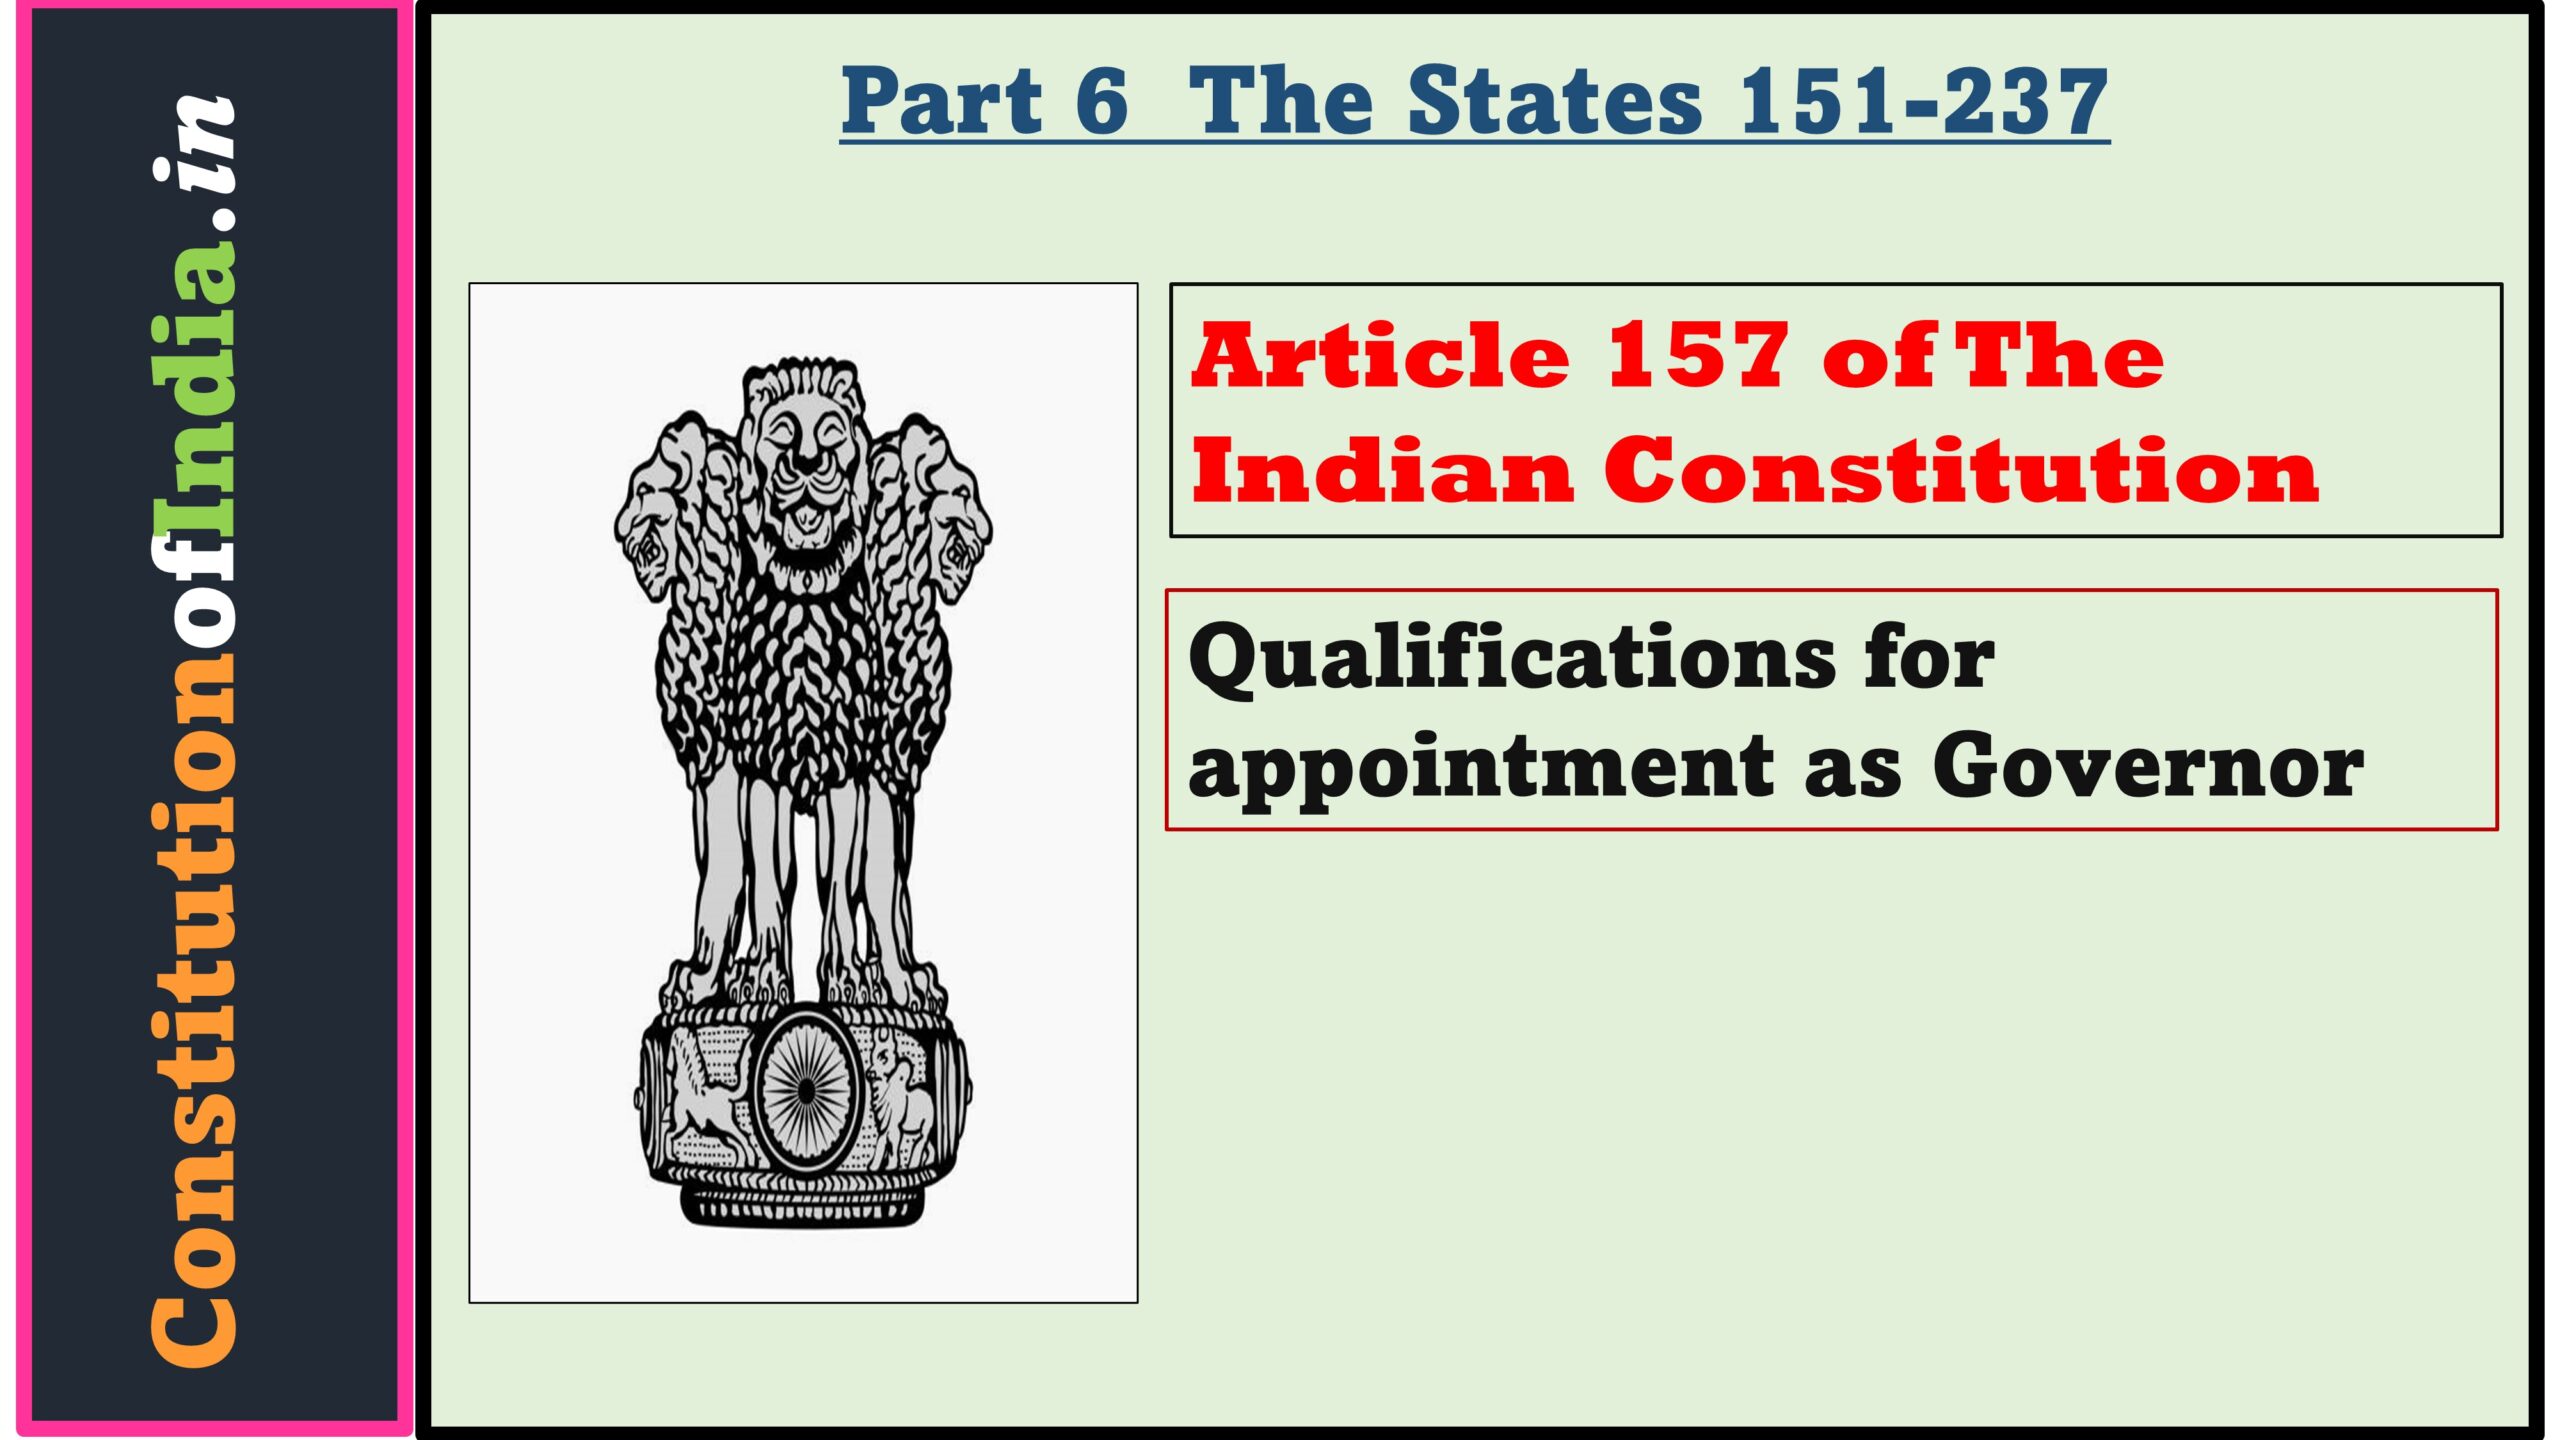 Article 157 of The Indian Constitution